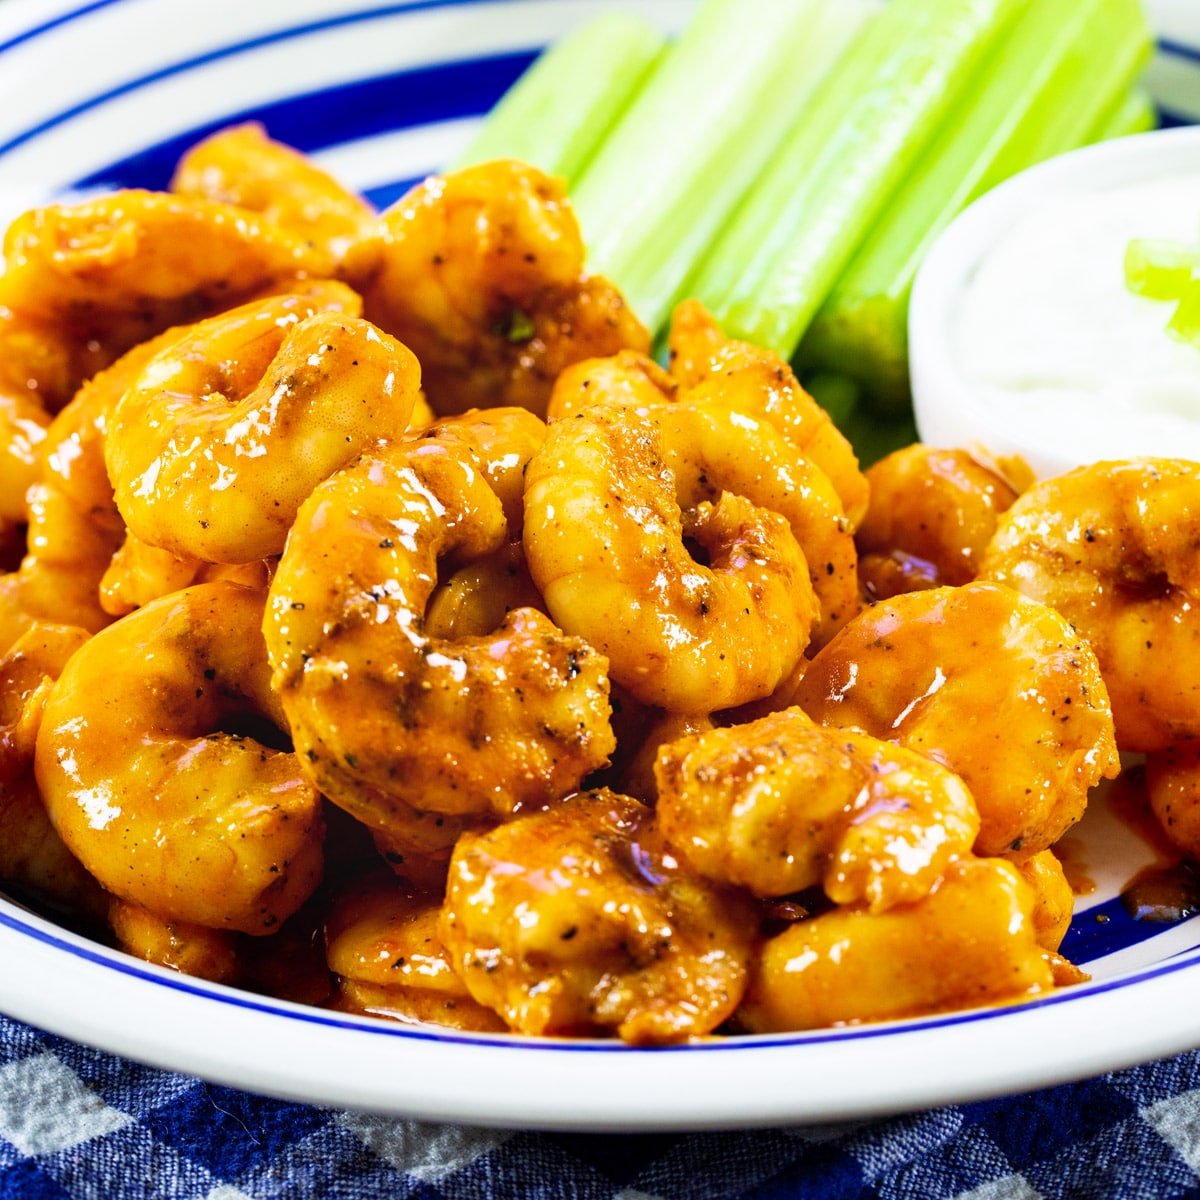 Buffalo Shrimp on a plate with celery and small bowl of dressing.